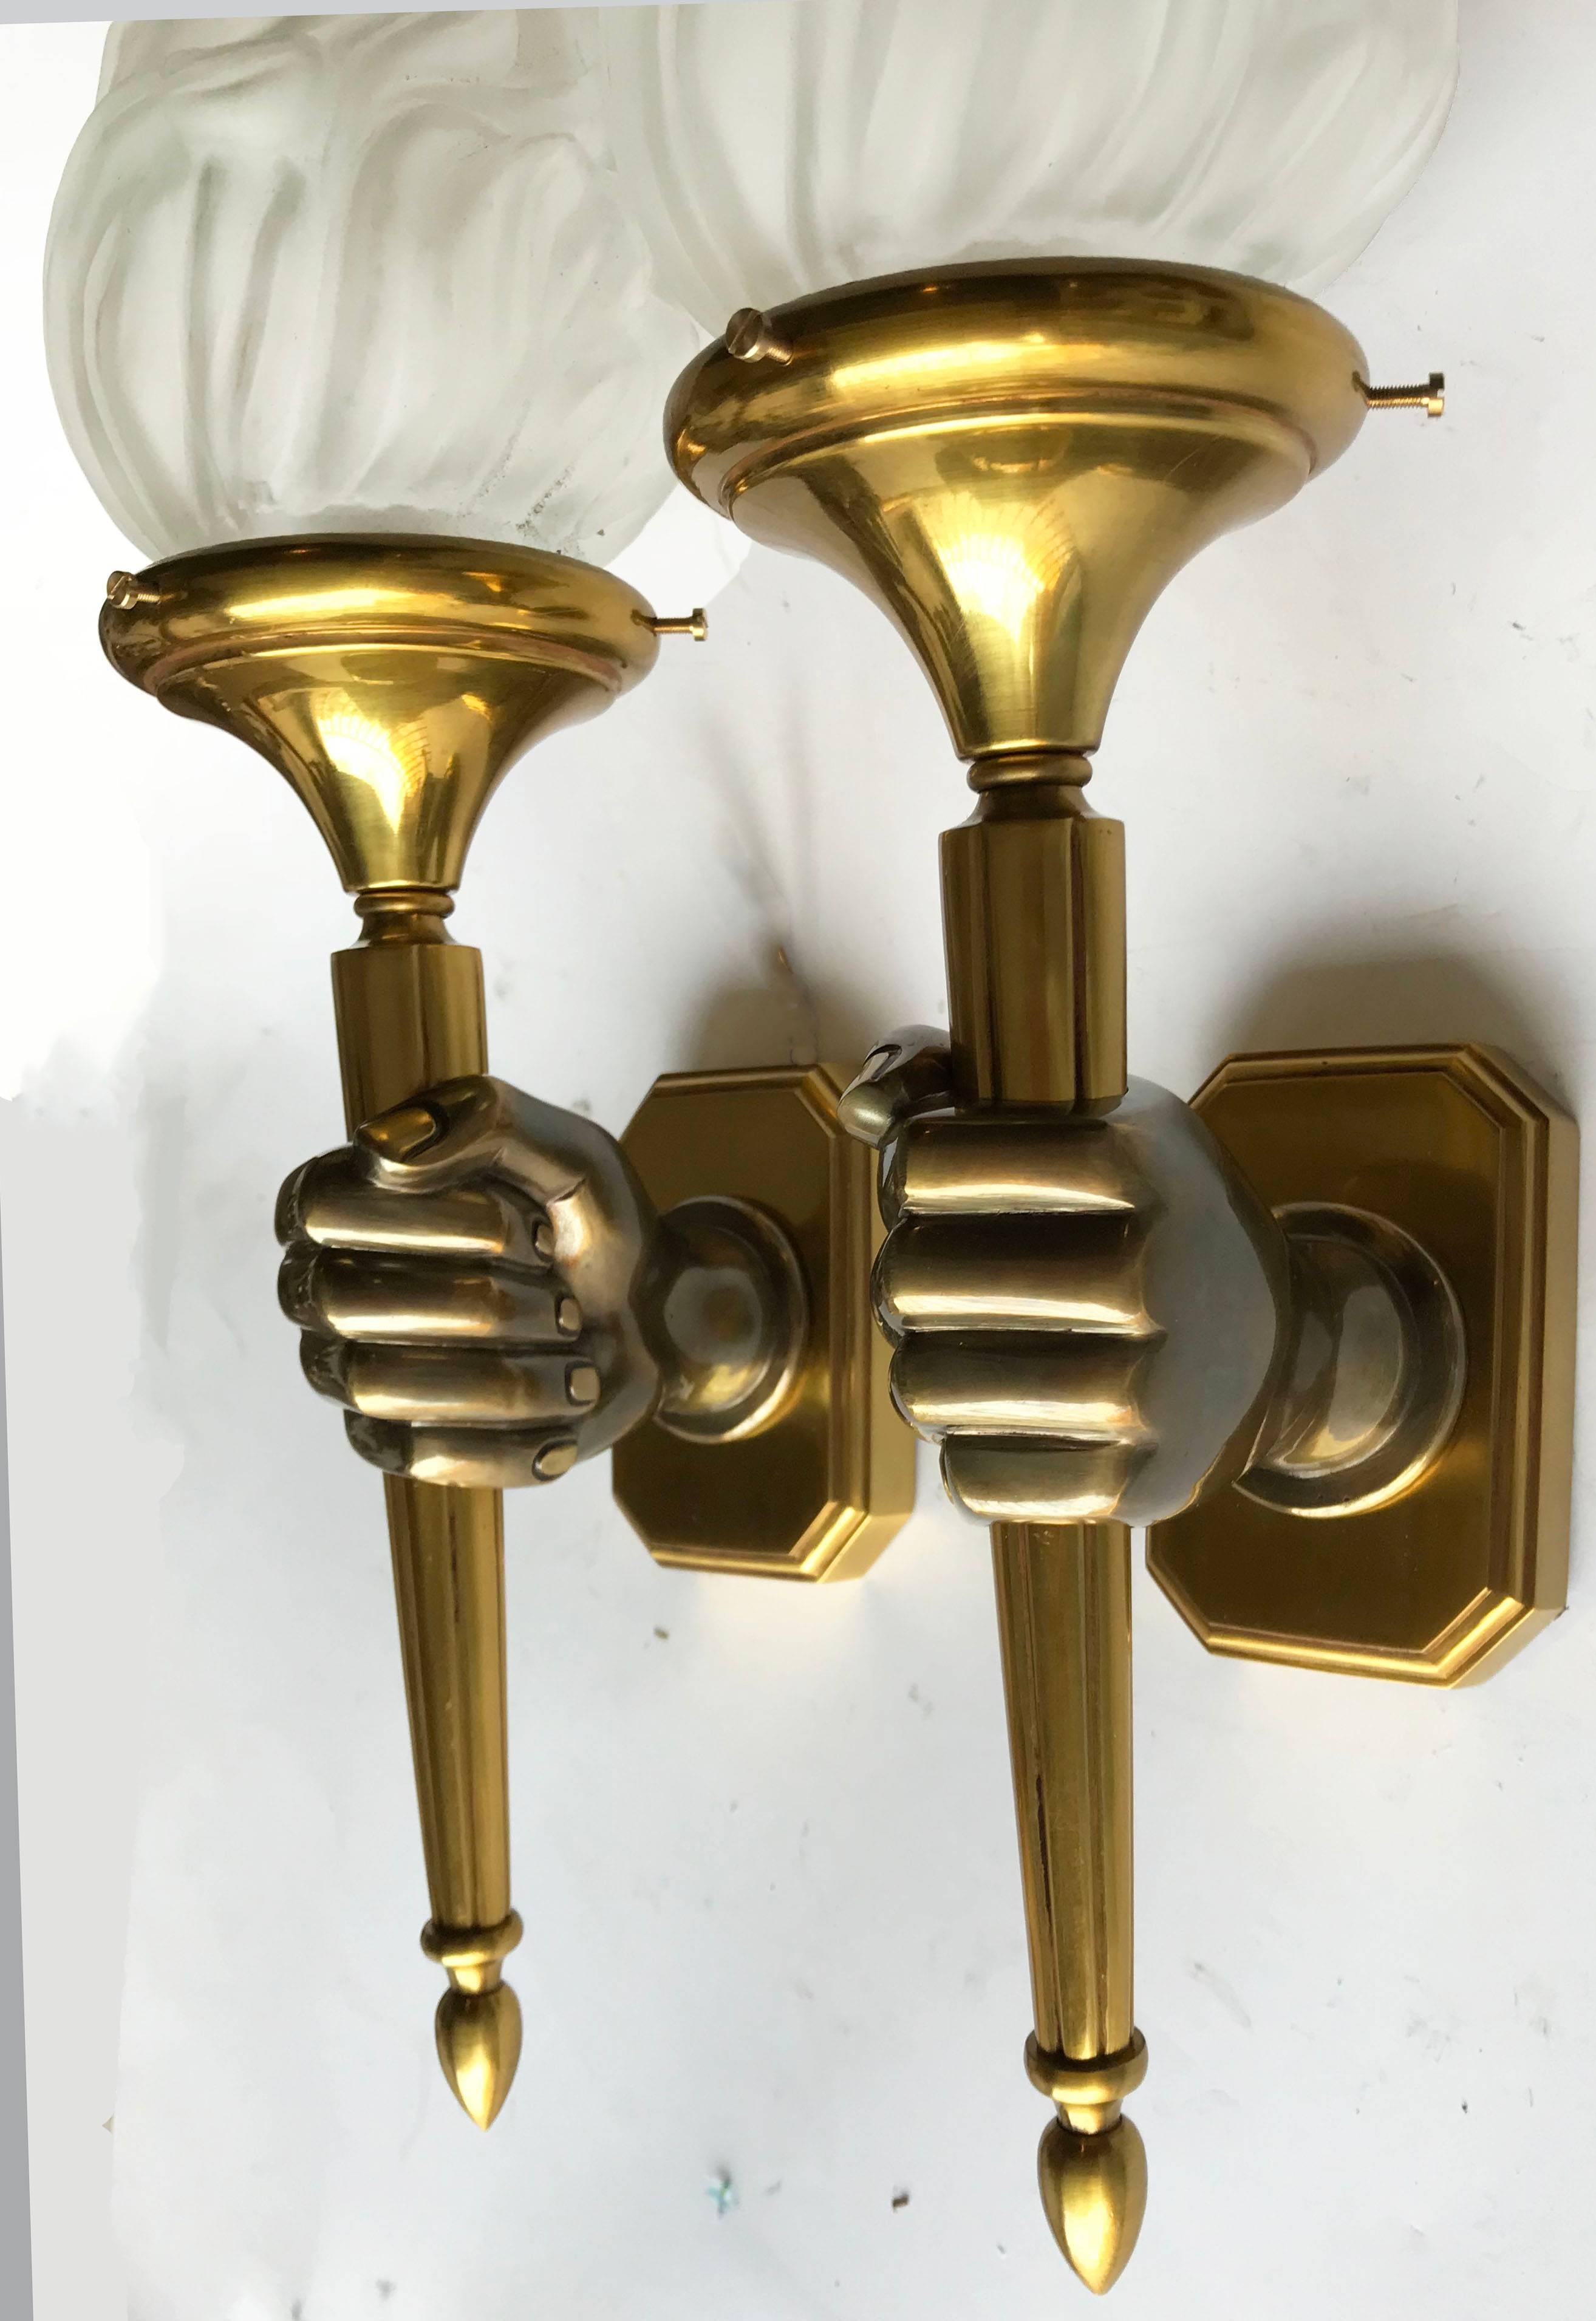 Superb pair of opposite hand sconces by Maison Baguès, figuring a hand holding a torche.
Two patina bronze
One light, 65 watts max bulb
Back plate: 4.25 inches height, 2.75 inches wide 
Priced by pair
